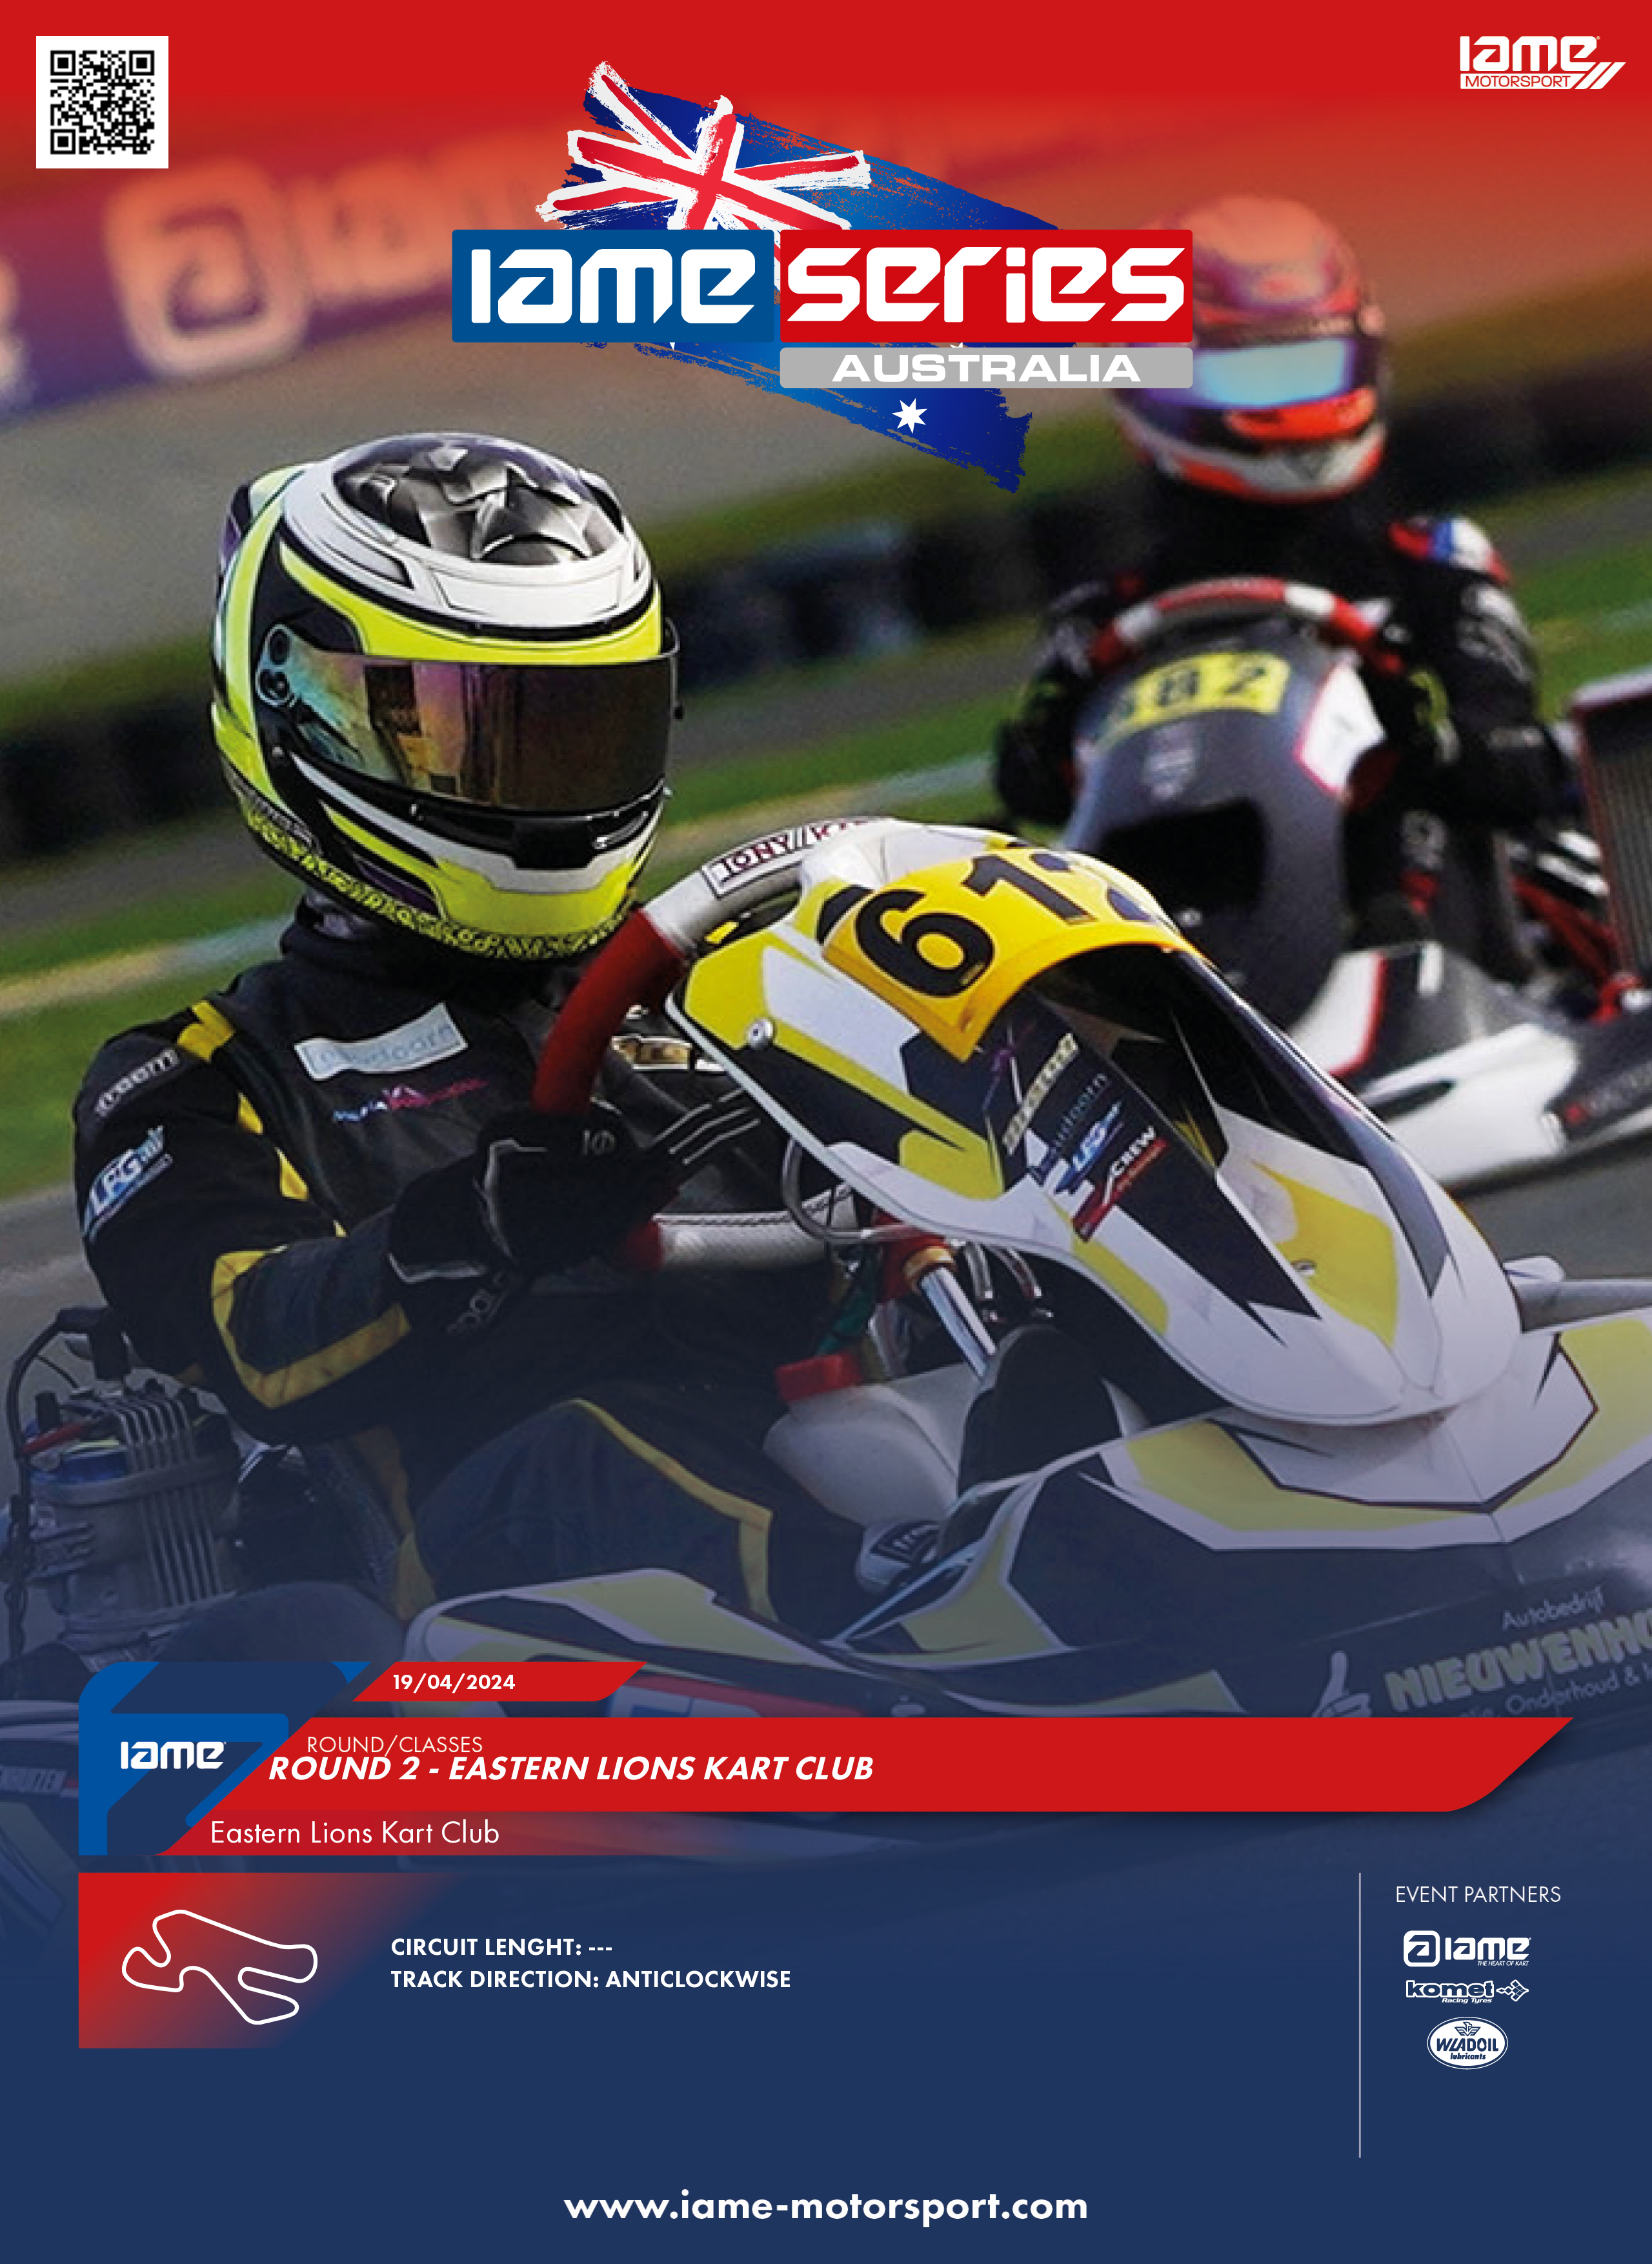 Round 2 - Eastern Lions Kart Club: A Prime Karting Event in the Heart of Australia